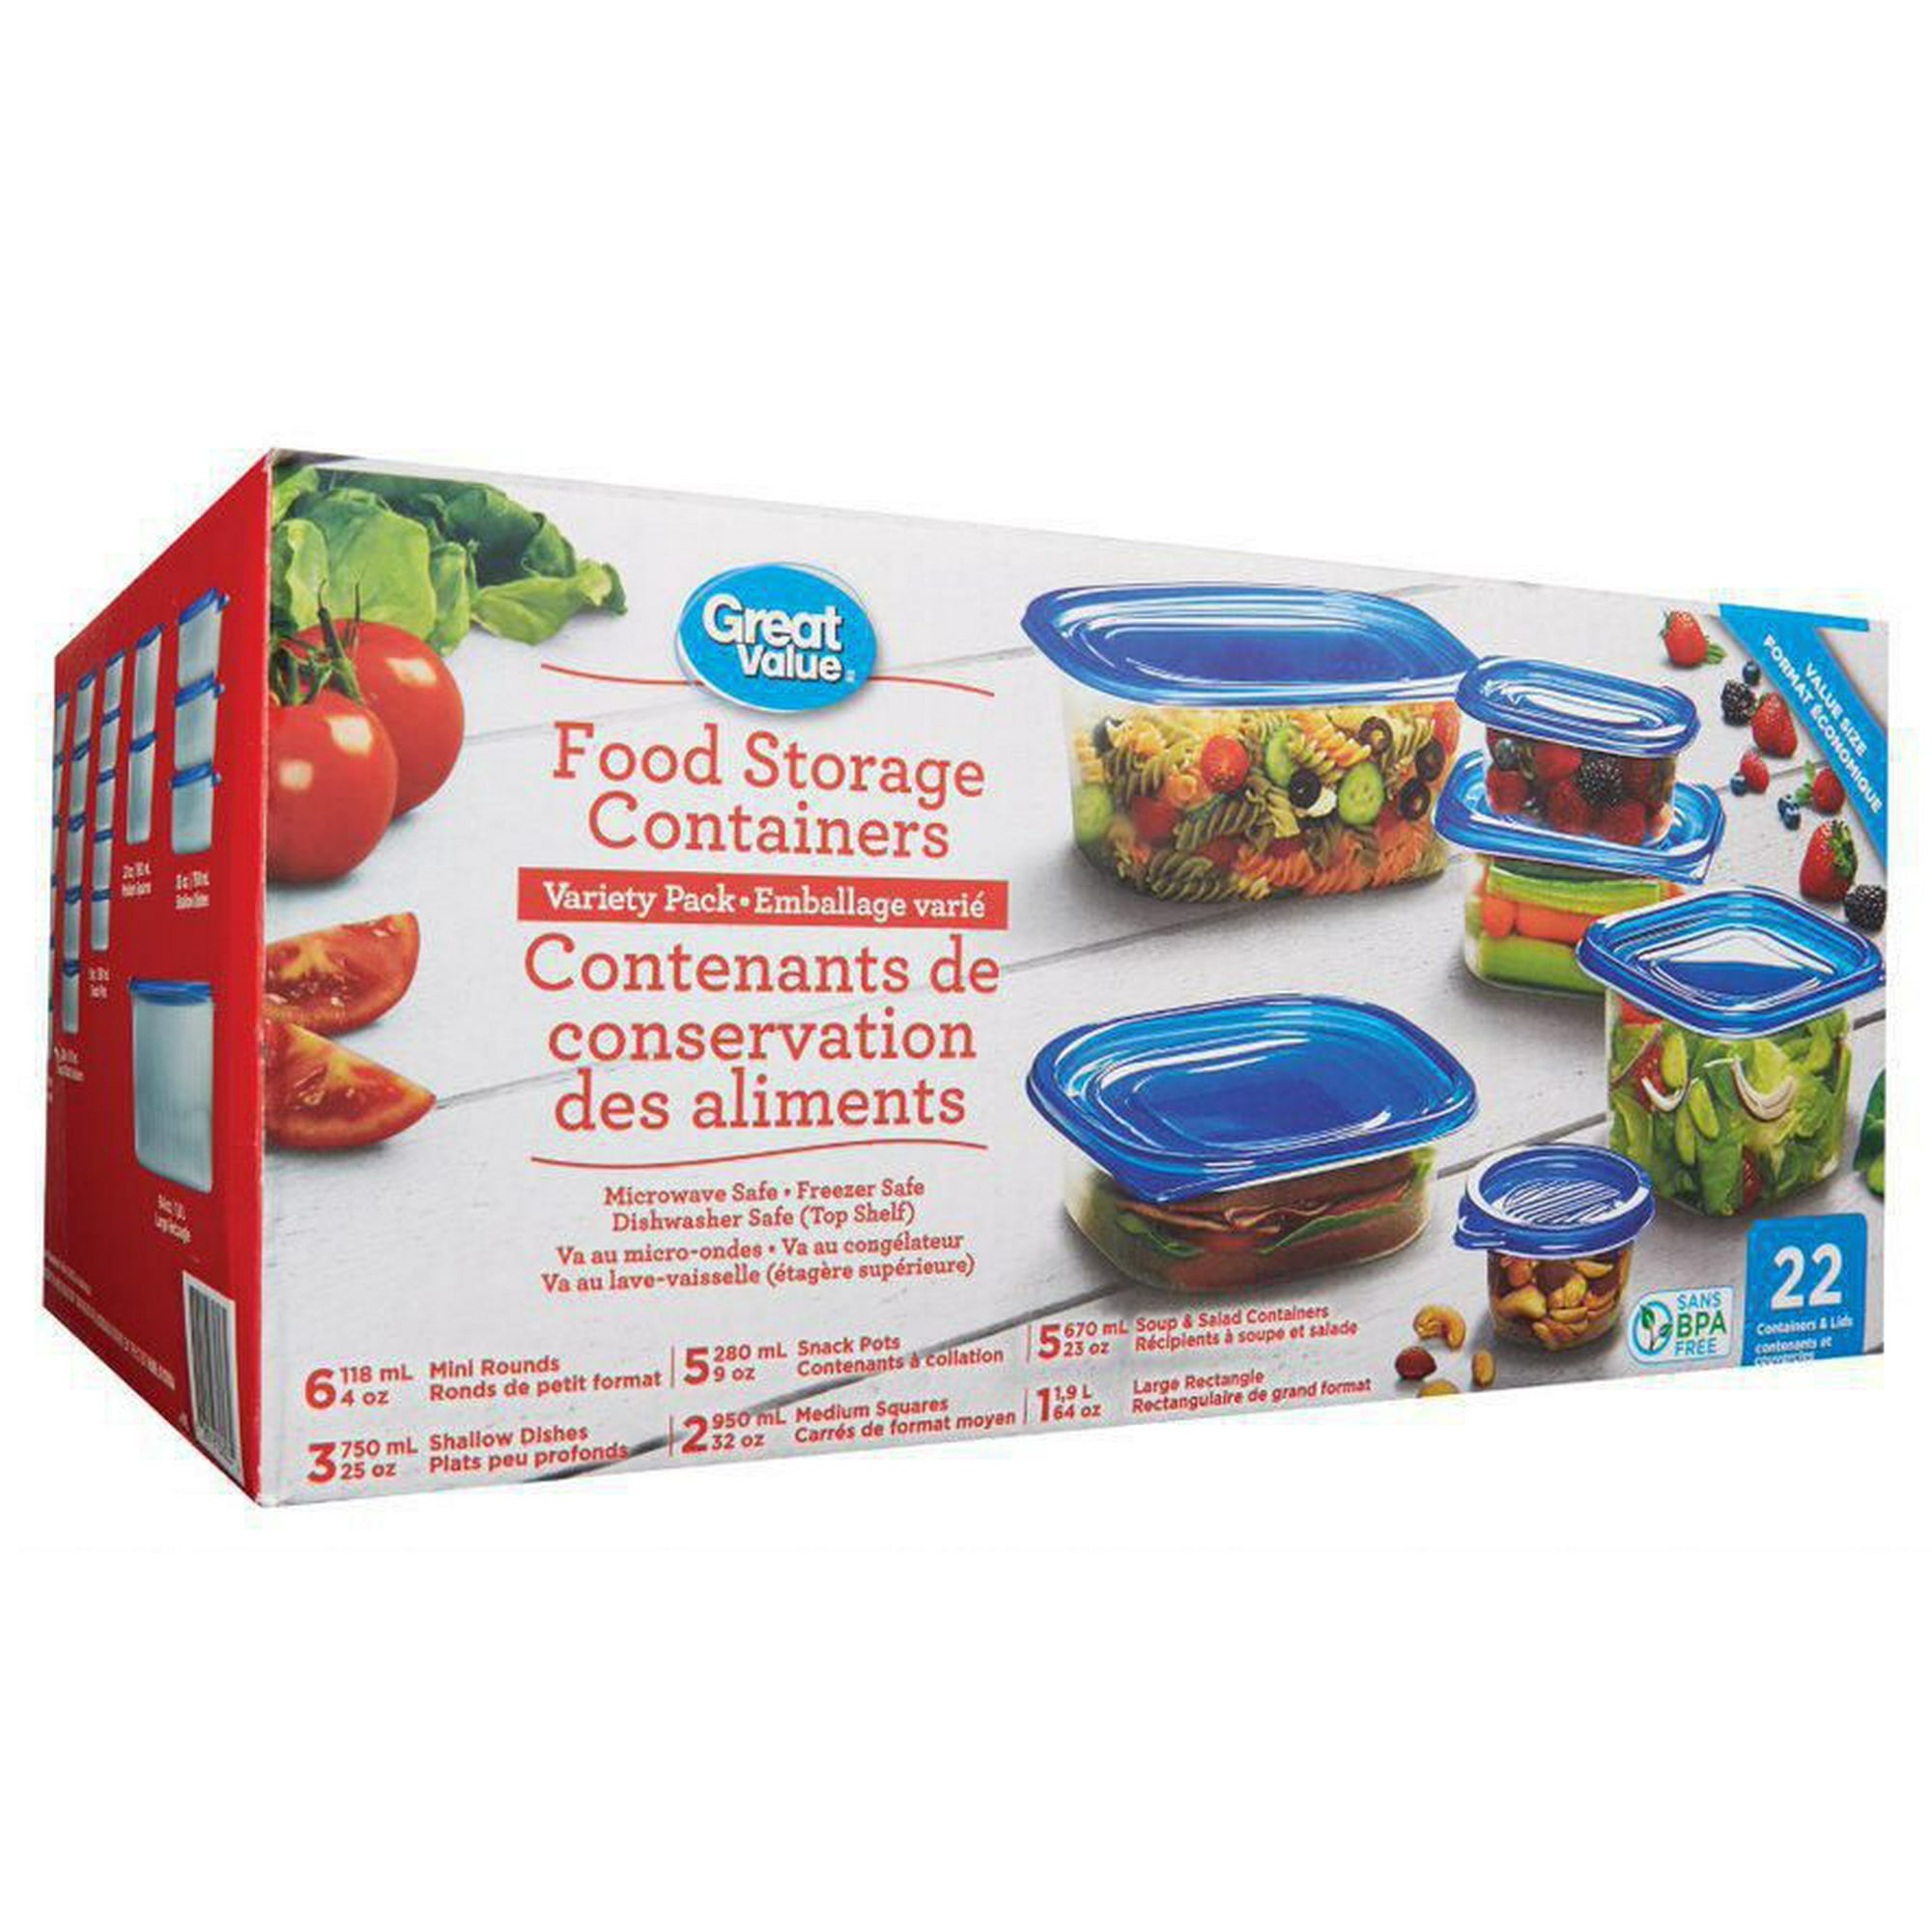 Great Value Food Storage Containers Variety Pack, 22 containers